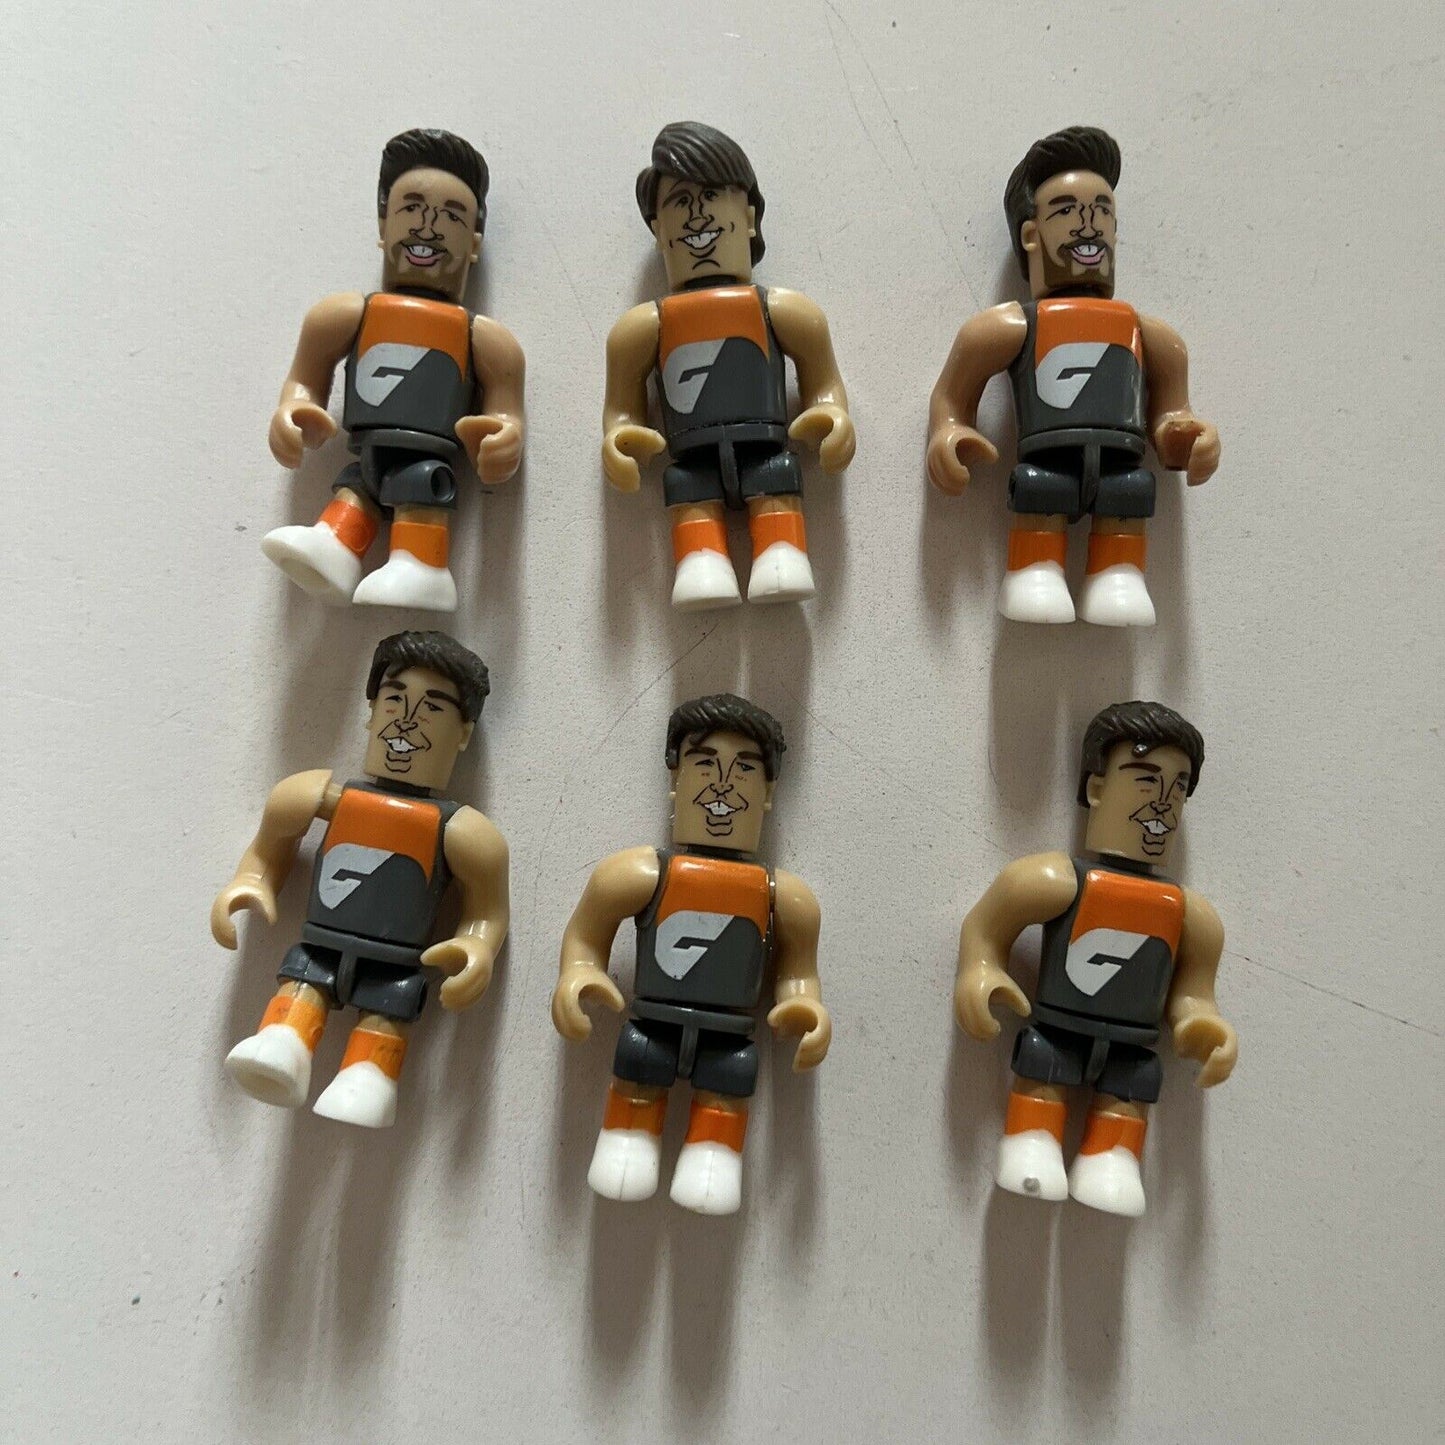 Afl Micro-figures 2015 Series 2 Greater Western Sydney - Ward, Griffen, Cameron